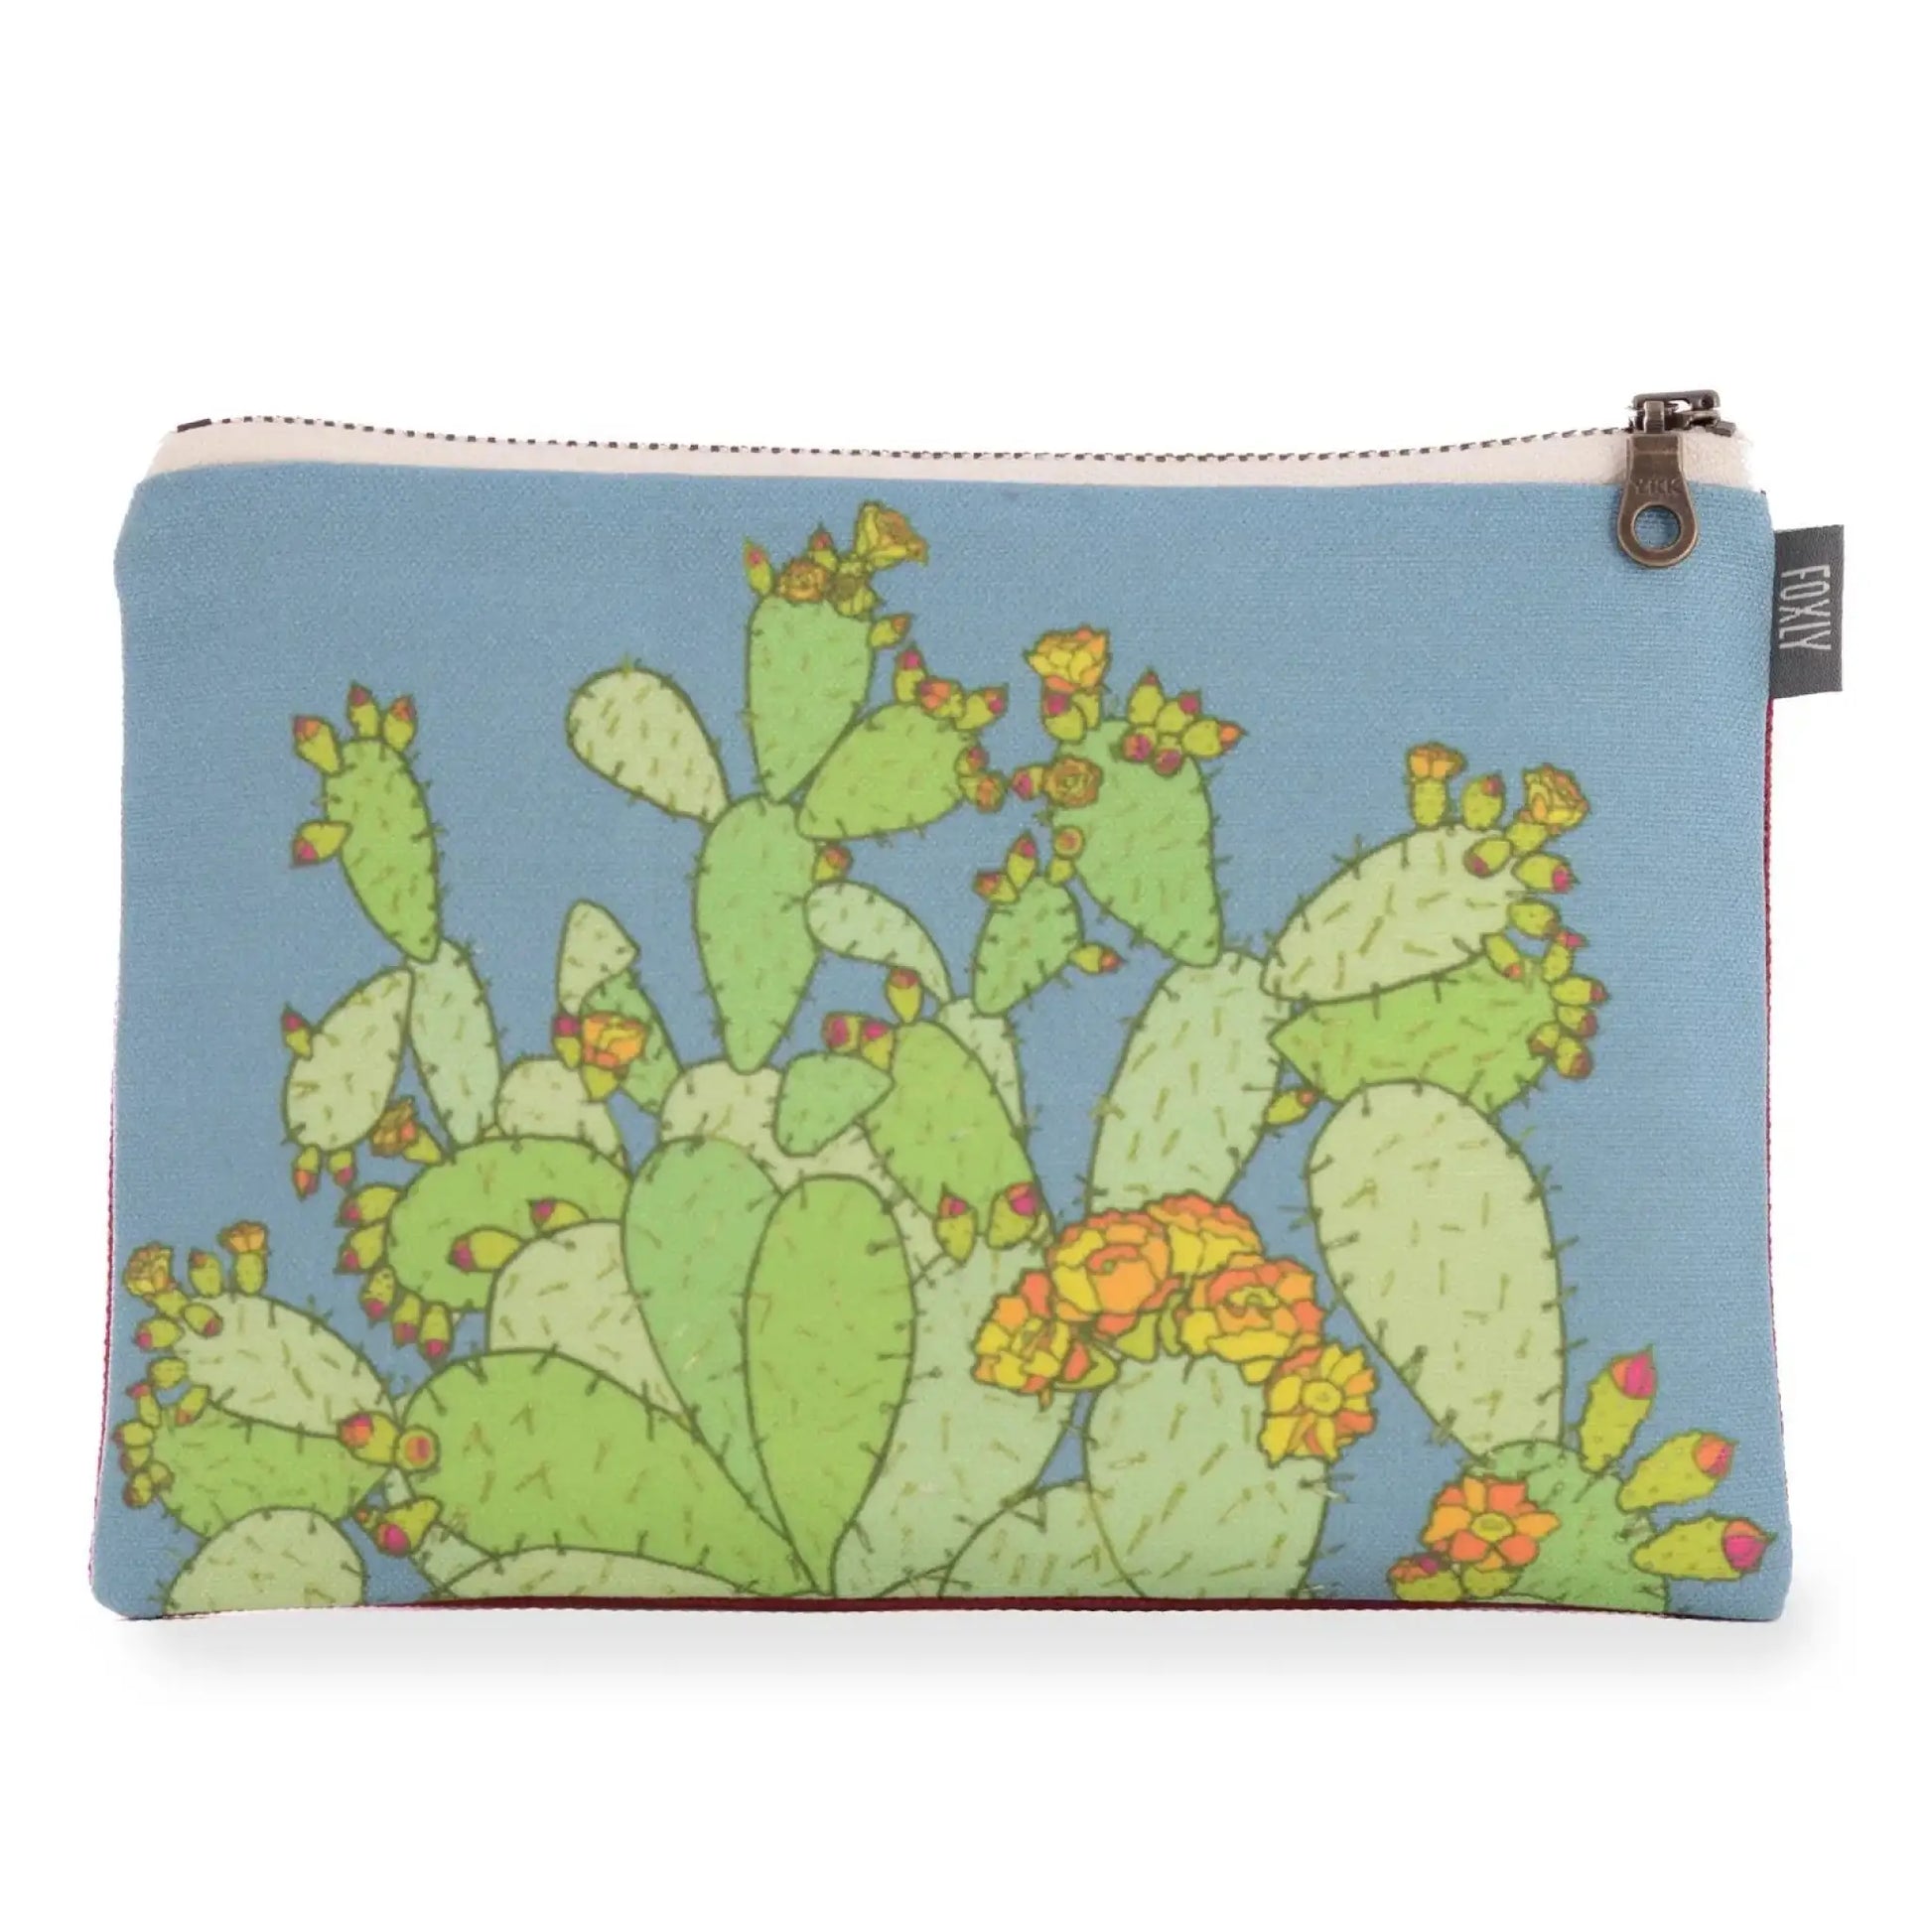 Prickly Pear Cactus Zipper Fabric Pouch - Bag